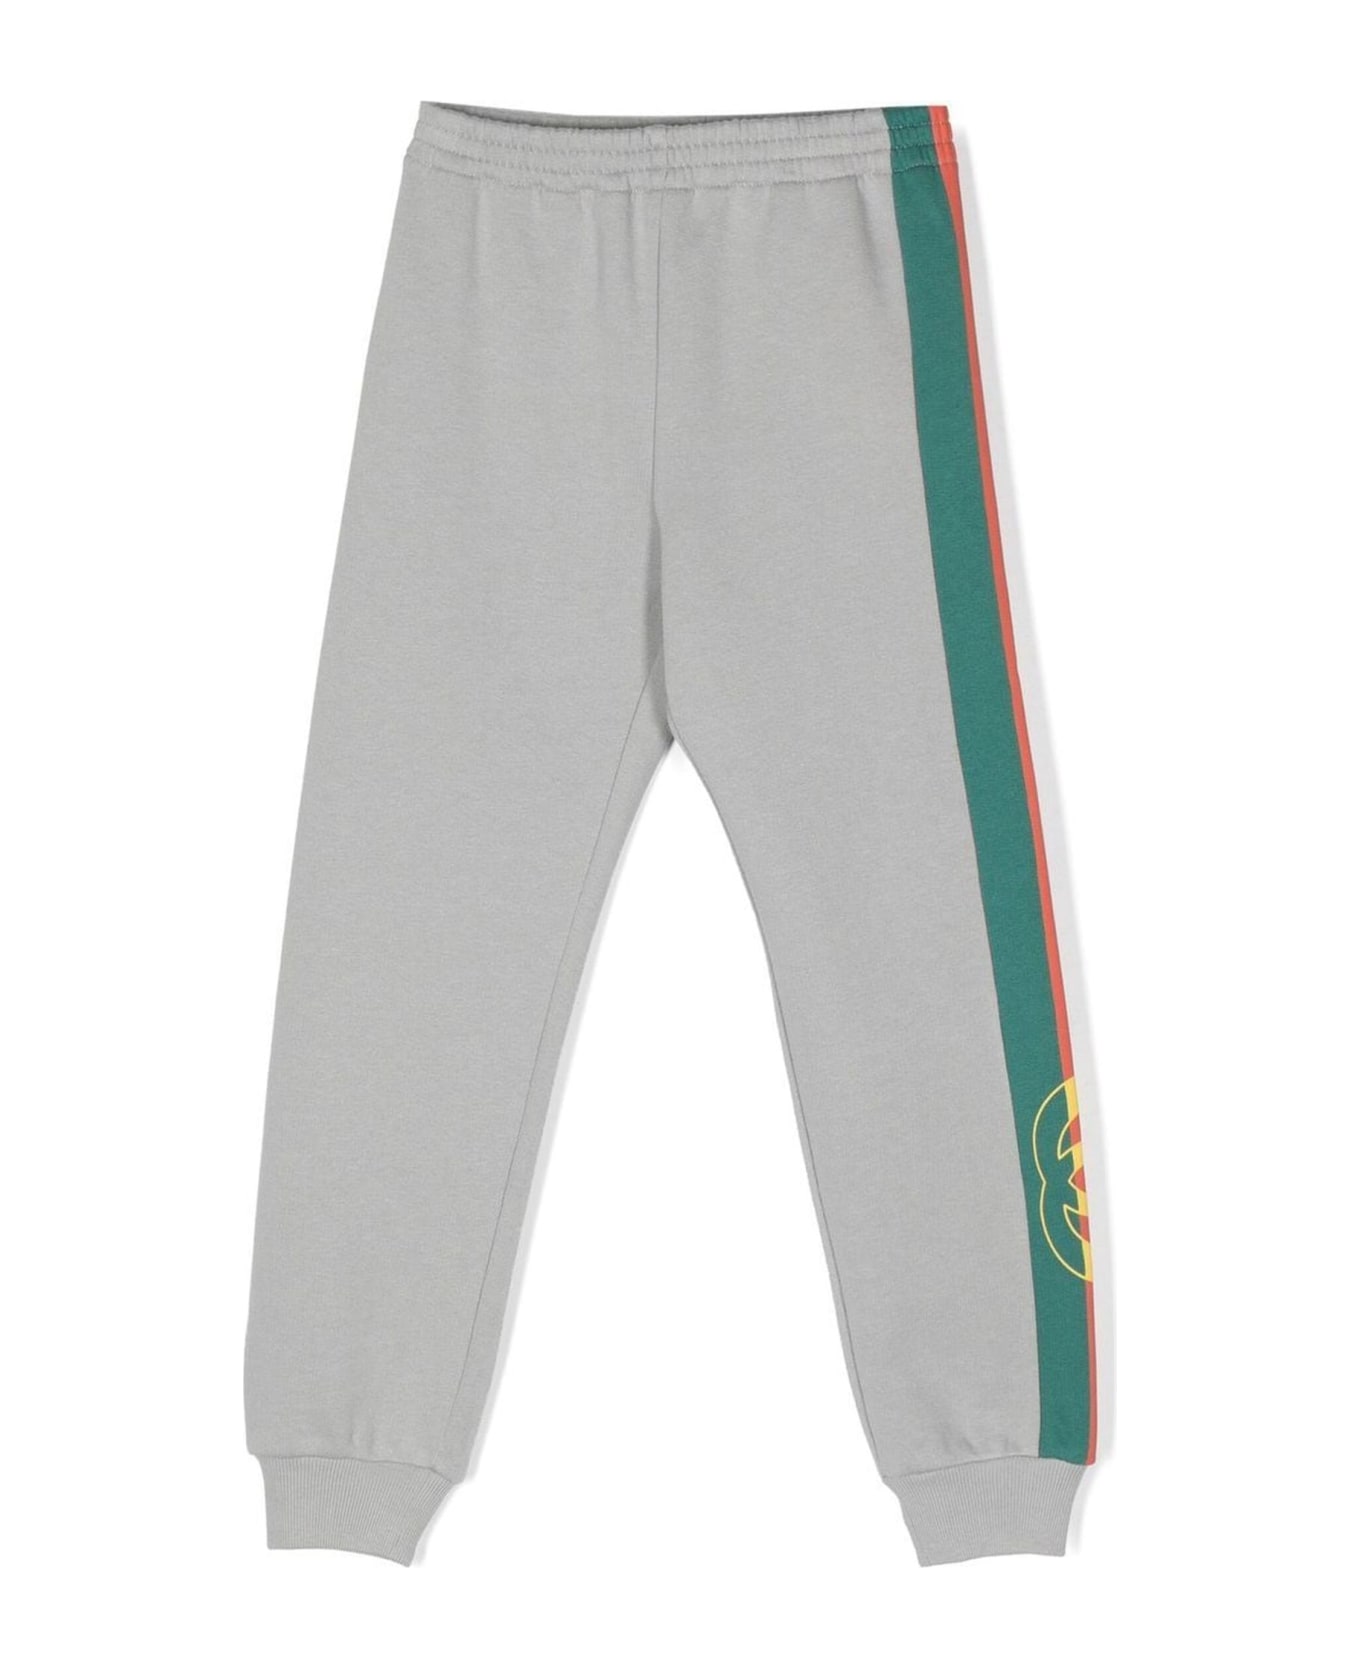 Gucci Grey Cotton Track Pants - Thunderstorm